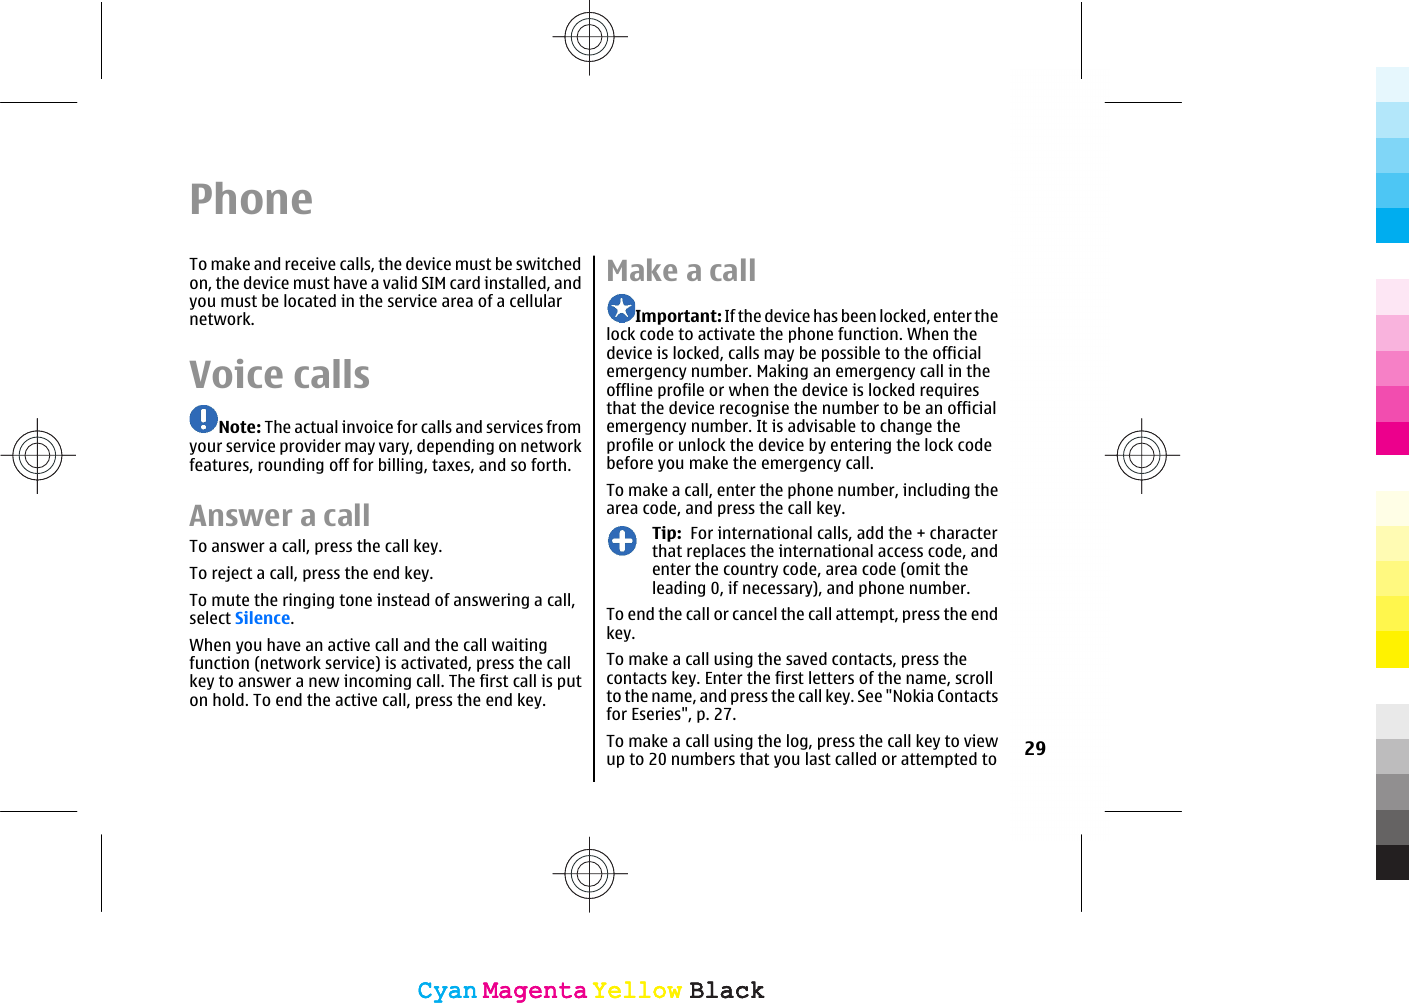 PhoneTo make and receive calls, the device must be switchedon, the device must have a valid SIM card installed, andyou must be located in the service area of a cellularnetwork.Voice callsNote: The actual invoice for calls and services fromyour service provider may vary, depending on networkfeatures, rounding off for billing, taxes, and so forth.Answer a callTo answer a call, press the call key.To reject a call, press the end key.To mute the ringing tone instead of answering a call,select Silence.When you have an active call and the call waitingfunction (network service) is activated, press the callkey to answer a new incoming call. The first call is puton hold. To end the active call, press the end key.Make a callImportant: If the device has been locked, enter thelock code to activate the phone function. When thedevice is locked, calls may be possible to the officialemergency number. Making an emergency call in theoffline profile or when the device is locked requiresthat the device recognise the number to be an officialemergency number. It is advisable to change theprofile or unlock the device by entering the lock codebefore you make the emergency call.To make a call, enter the phone number, including thearea code, and press the call key.Tip:  For international calls, add the + characterthat replaces the international access code, andenter the country code, area code (omit theleading 0, if necessary), and phone number.To end the call or cancel the call attempt, press the endkey.To make a call using the saved contacts, press thecontacts key. Enter the first letters of the name, scrollto the name, and press the call key. See &quot;Nokia Contactsfor Eseries&quot;, p. 27.To make a call using the log, press the call key to viewup to 20 numbers that you last called or attempted to 29CyanCyanMagentaMagentaYellowYellowBlackBlackCyanCyanMagentaMagentaYellowYellowBlackBlack